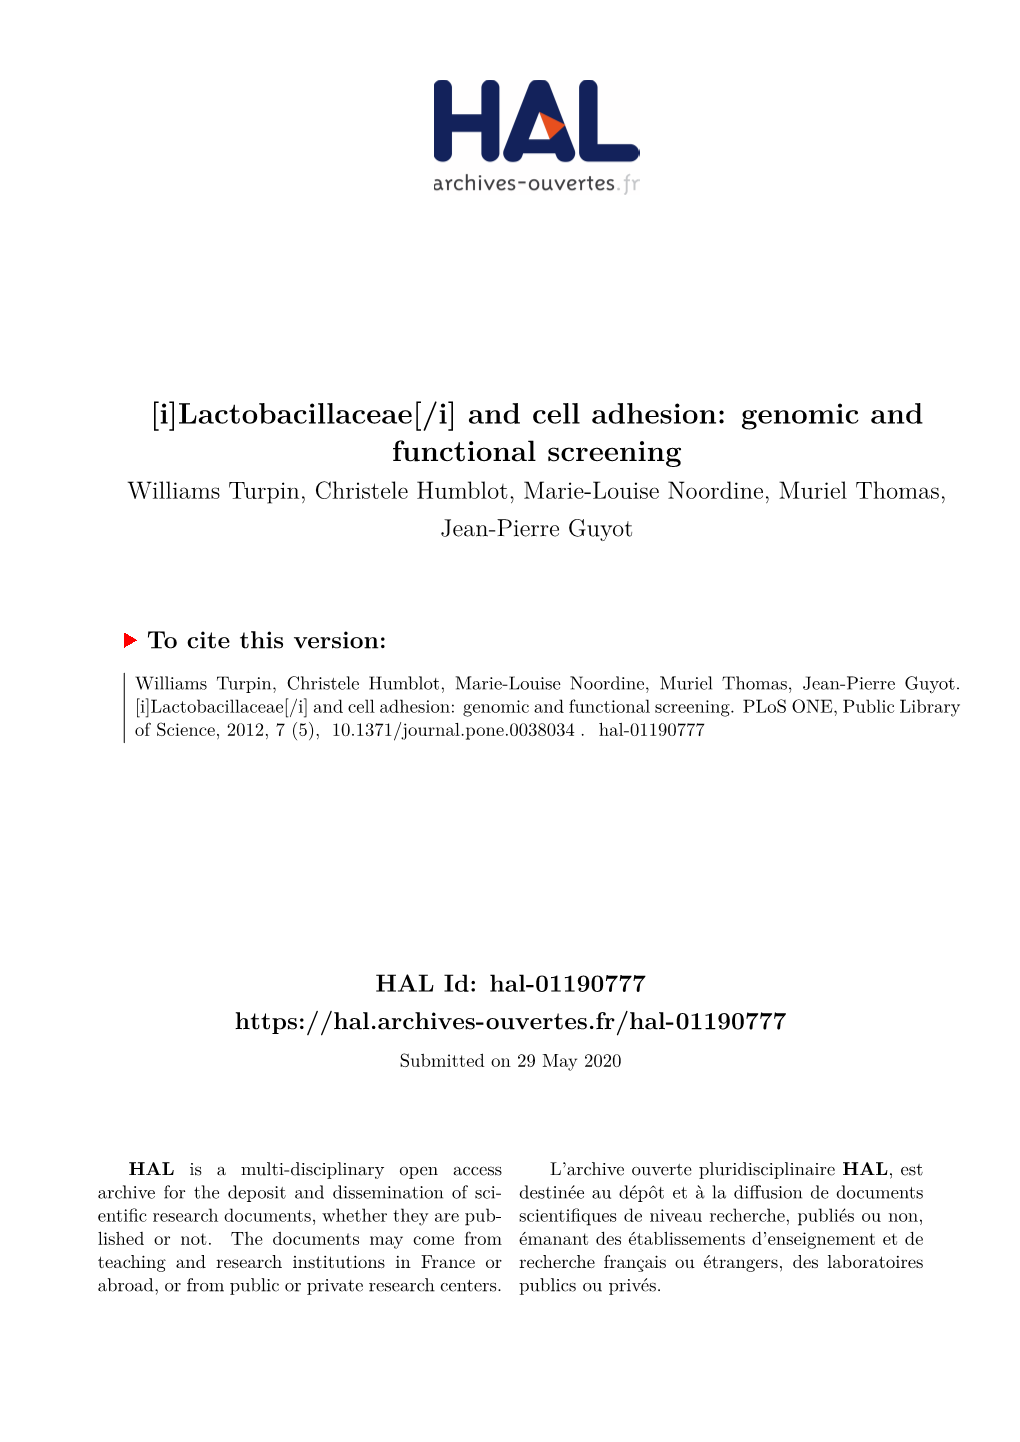 Lactobacillaceae[/I] and Cell Adhesion: Genomic and Functional Screening Williams Turpin, Christele Humblot, Marie-Louise Noordine, Muriel Thomas, Jean-Pierre Guyot